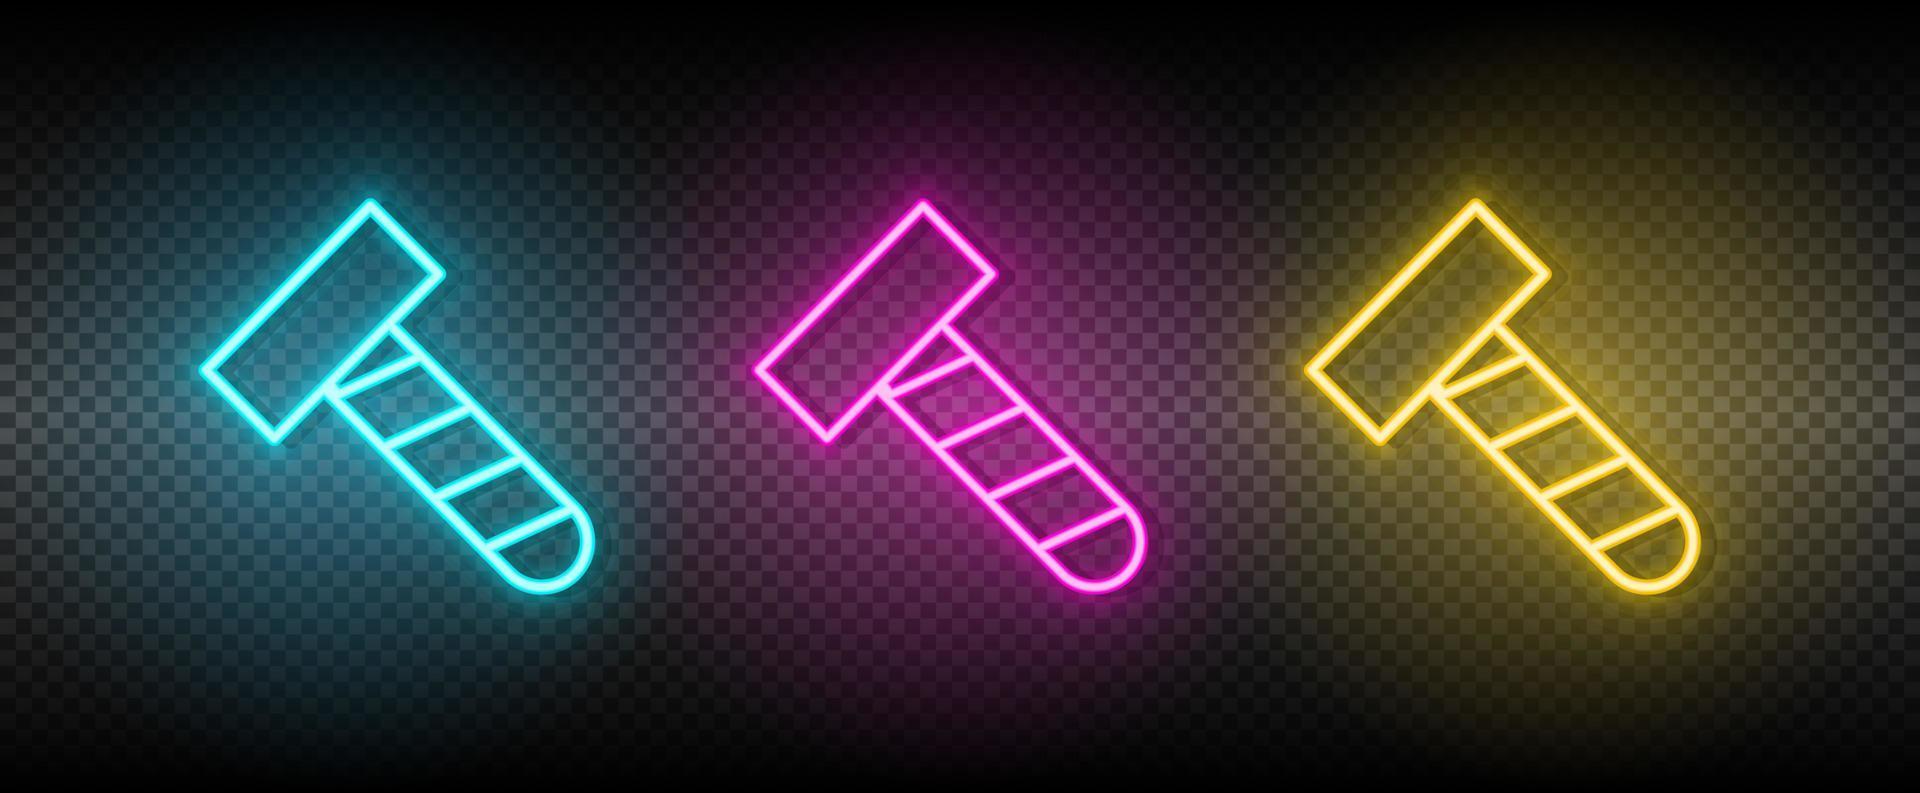 bolt, make vector icon yellow, pink, blue neon set. Tools vector icon on dark transparency background